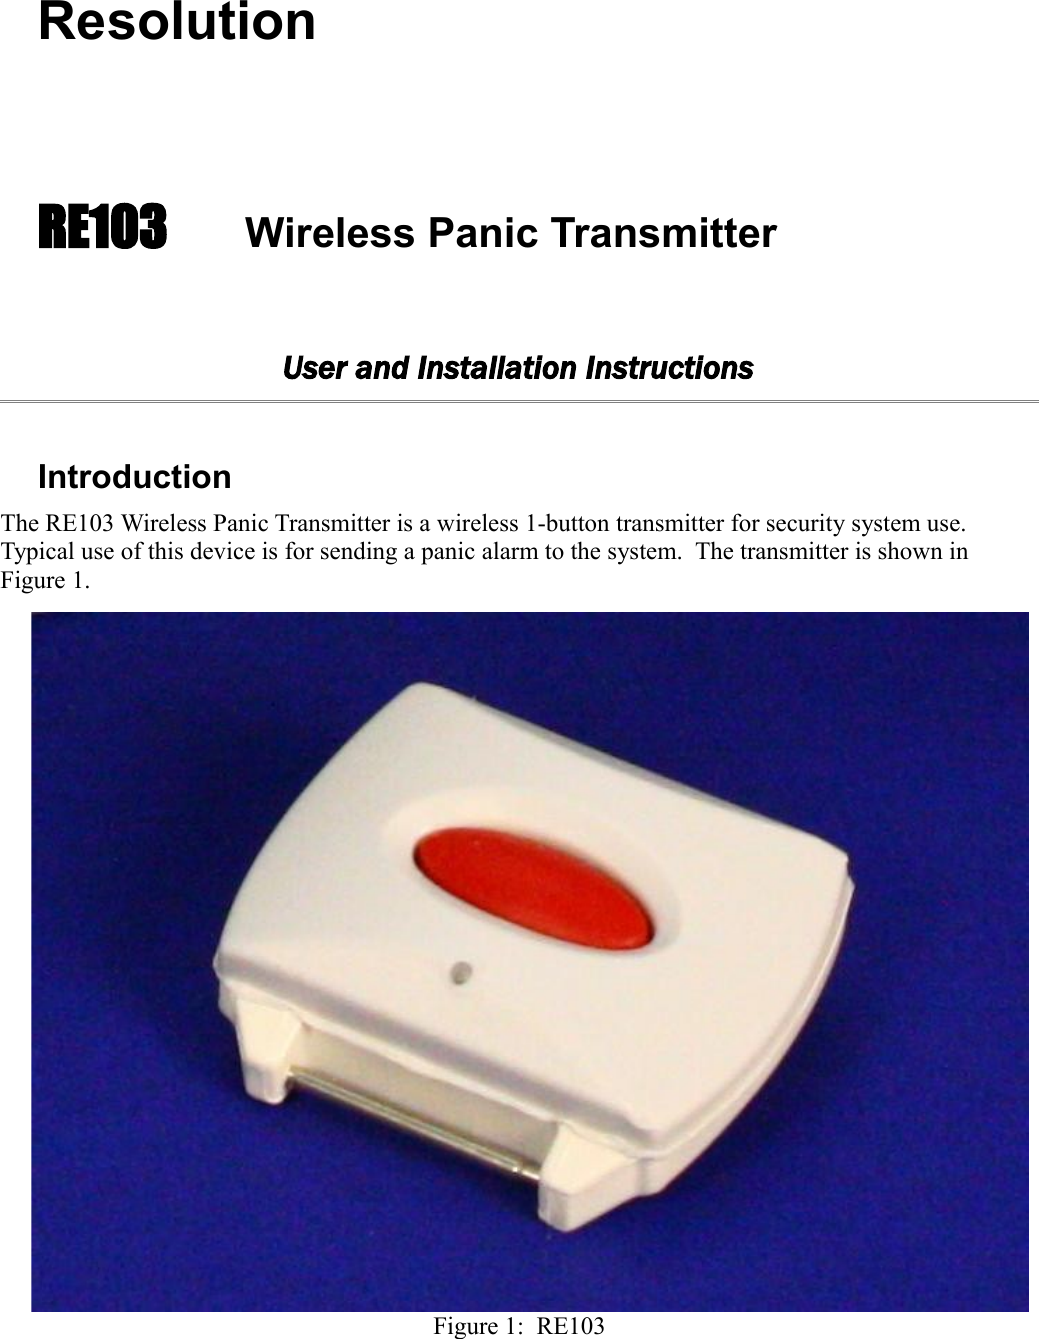 ResolutionRE103   Wireless Panic TransmitterUser and Installation InstructionsIntroductionThe RE103 Wireless Panic Transmitter is a wireless 1-button transmitter for security system use. Typical use of this device is for sending a panic alarm to the system.  The transmitter is shown in Figure 1.Figure 1:  RE103